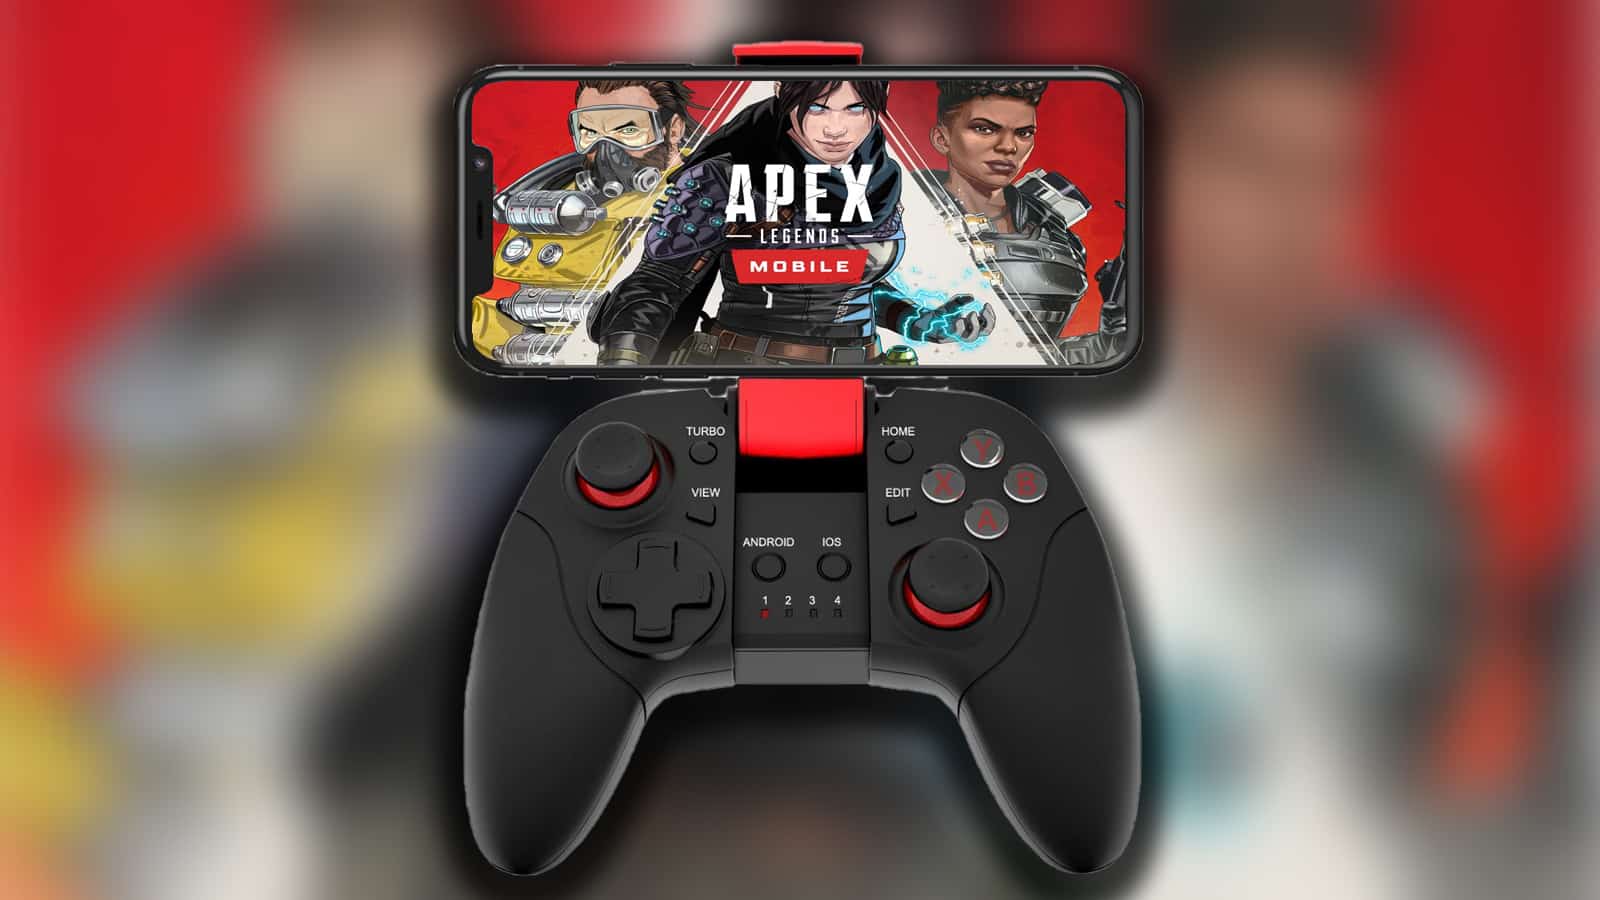 Apex Legends Mobile will have a controller support in the future